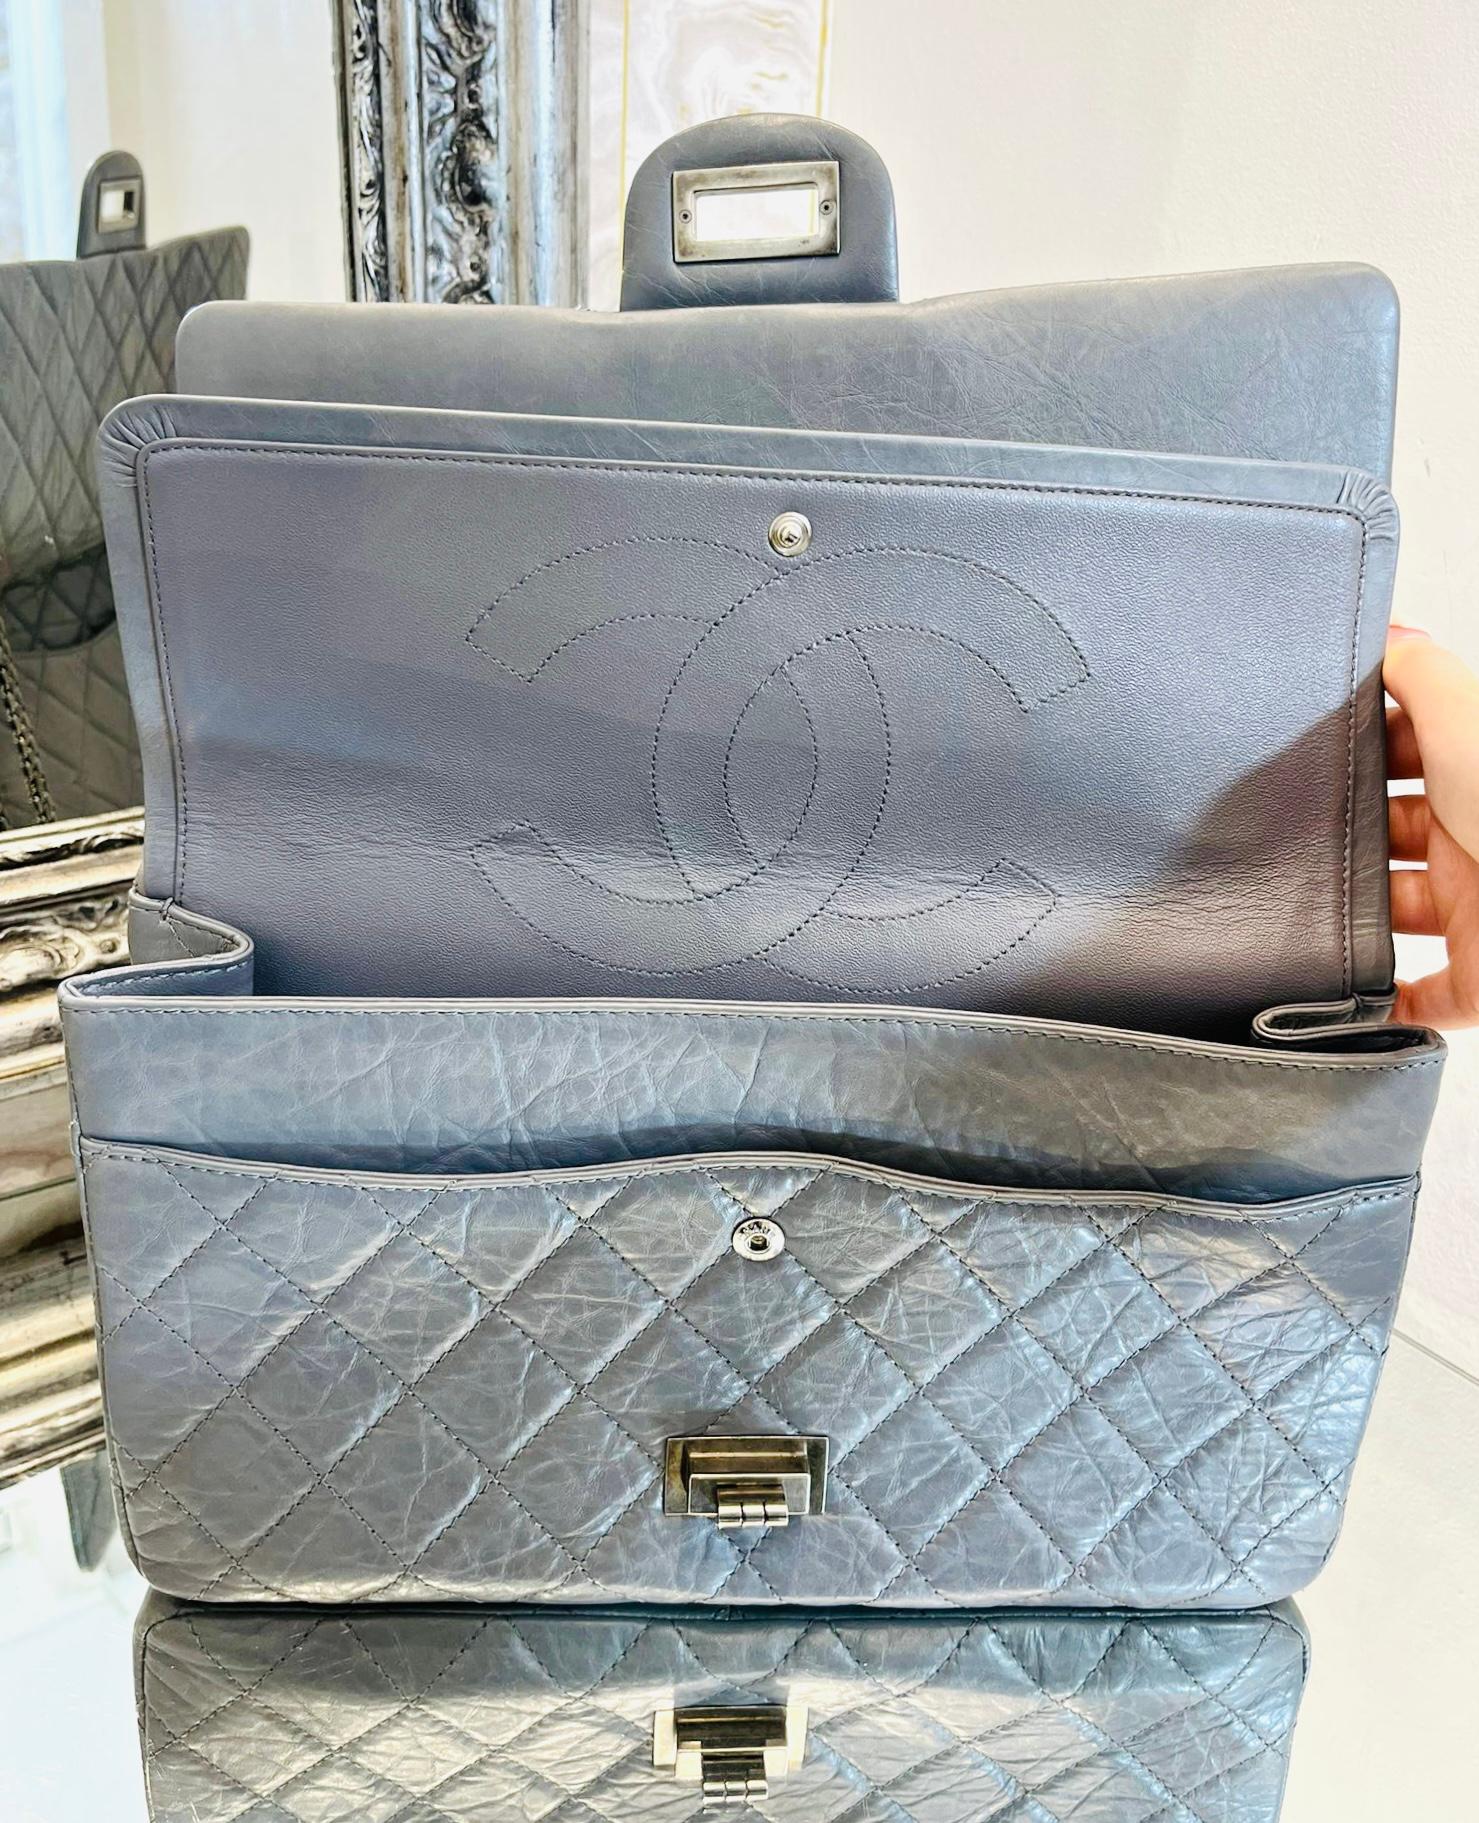 Women's Chanel 2.55 Reissue Double Flap Leather Bag For Sale